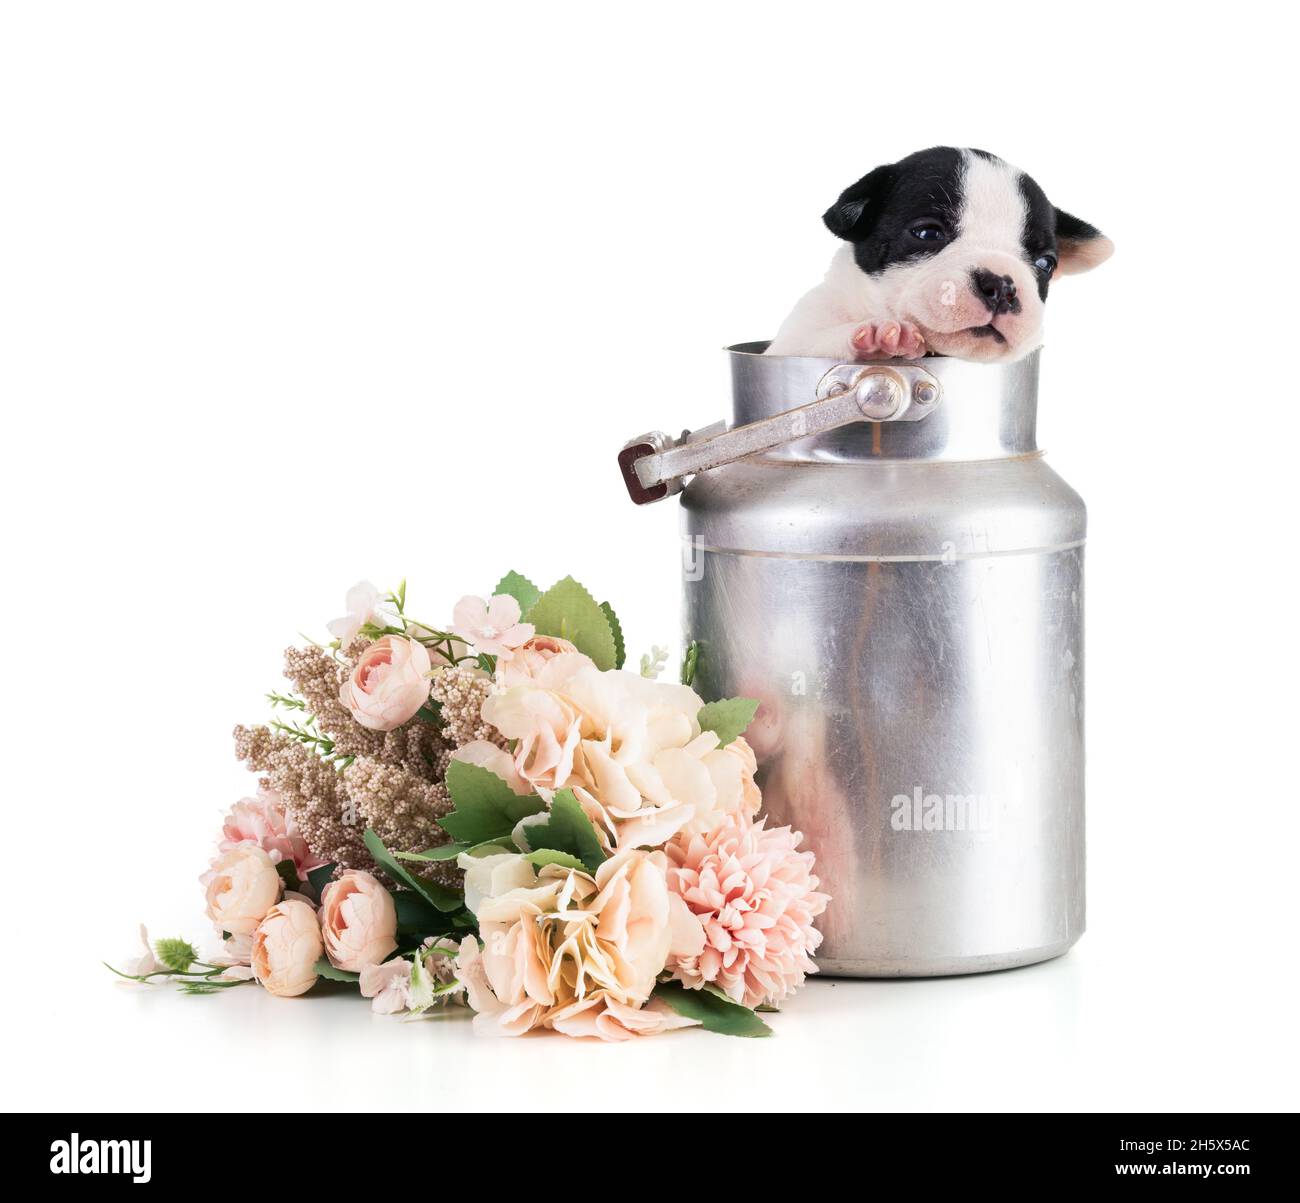 Portrait of american bully 3 week old puppy in an antique milk jug on white background Stock Photo